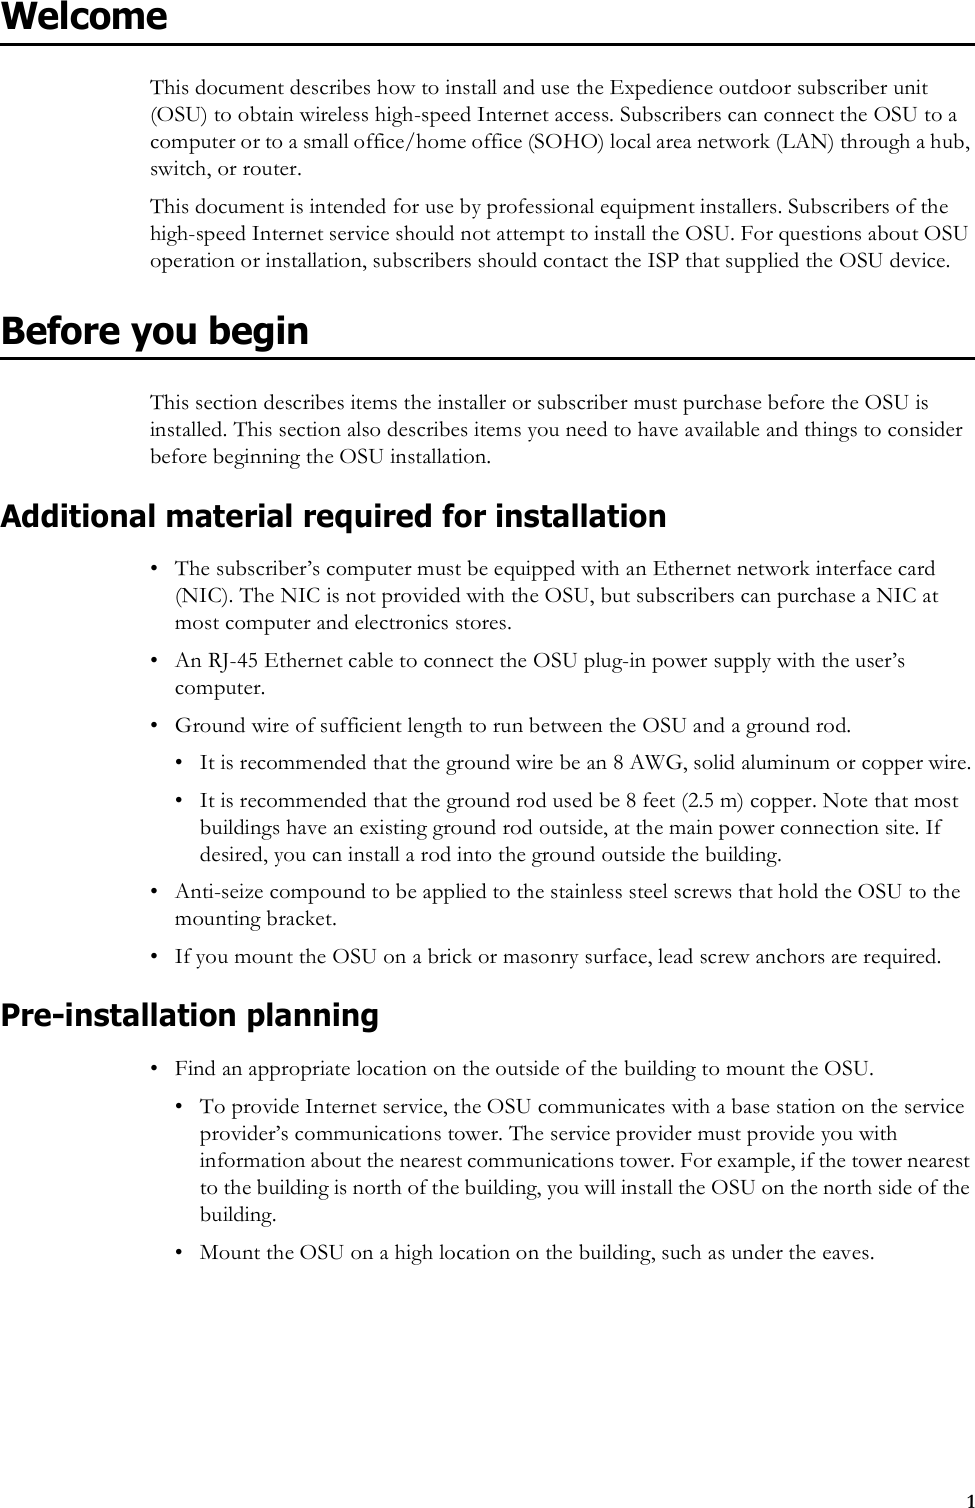 1WelcomeThis document describes how to install and use the Expedience outdoor subscriber unit (OSU) to obtain wireless high-speed Internet access. Subscribers can connect the OSU to a computer or to a small office/home office (SOHO) local area network (LAN) through a hub, switch, or router.This document is intended for use by professional equipment installers. Subscribers of the high-speed Internet service should not attempt to install the OSU. For questions about OSU operation or installation, subscribers should contact the ISP that supplied the OSU device. Before you beginThis section describes items the installer or subscriber must purchase before the OSU is installed. This section also describes items you need to have available and things to consider before beginning the OSU installation.Additional material required for installation• The subscriber’s computer must be equipped with an Ethernet network interface card (NIC). The NIC is not provided with the OSU, but subscribers can purchase a NIC at most computer and electronics stores.• An RJ-45 Ethernet cable to connect the OSU plug-in power supply with the user’s computer.• Ground wire of sufficient length to run between the OSU and a ground rod. • It is recommended that the ground wire be an 8 AWG, solid aluminum or copper wire.• It is recommended that the ground rod used be 8 feet (2.5 m) copper. Note that most buildings have an existing ground rod outside, at the main power connection site. If desired, you can install a rod into the ground outside the building. • Anti-seize compound to be applied to the stainless steel screws that hold the OSU to the mounting bracket.• If you mount the OSU on a brick or masonry surface, lead screw anchors are required. Pre-installation planning• Find an appropriate location on the outside of the building to mount the OSU. • To provide Internet service, the OSU communicates with a base station on the service provider’s communications tower. The service provider must provide you with information about the nearest communications tower. For example, if the tower nearest to the building is north of the building, you will install the OSU on the north side of the building.• Mount the OSU on a high location on the building, such as under the eaves. 